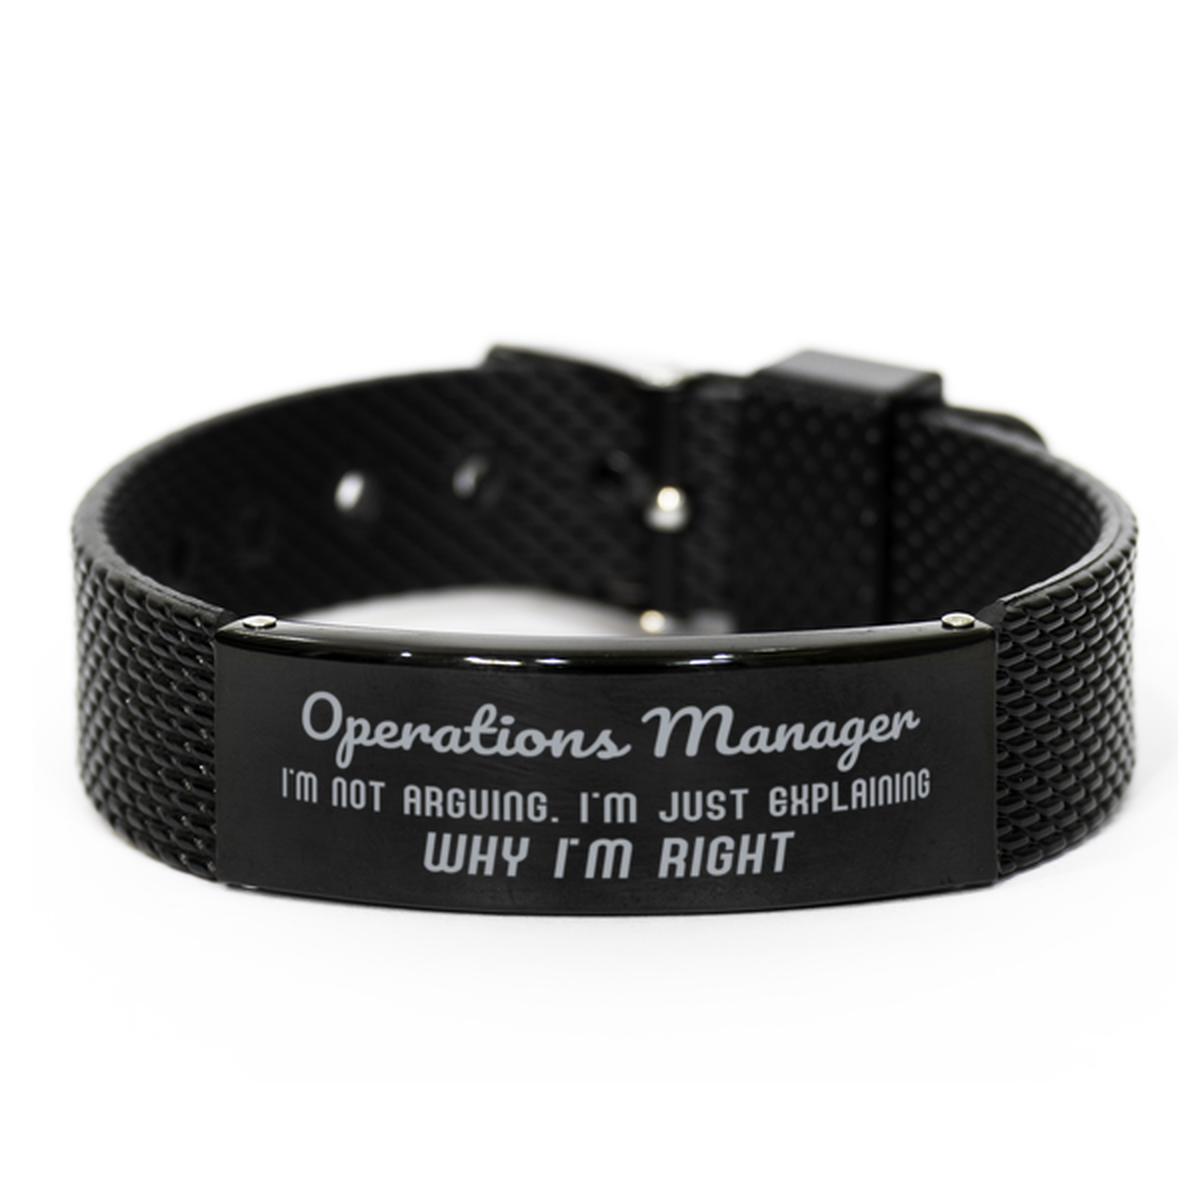 Operations Manager I'm not Arguing. I'm Just Explaining Why I'm RIGHT Black Shark Mesh Bracelet, Funny Saying Quote Operations Manager Gifts For Operations Manager Graduation Birthday Christmas Gifts for Men Women Coworker